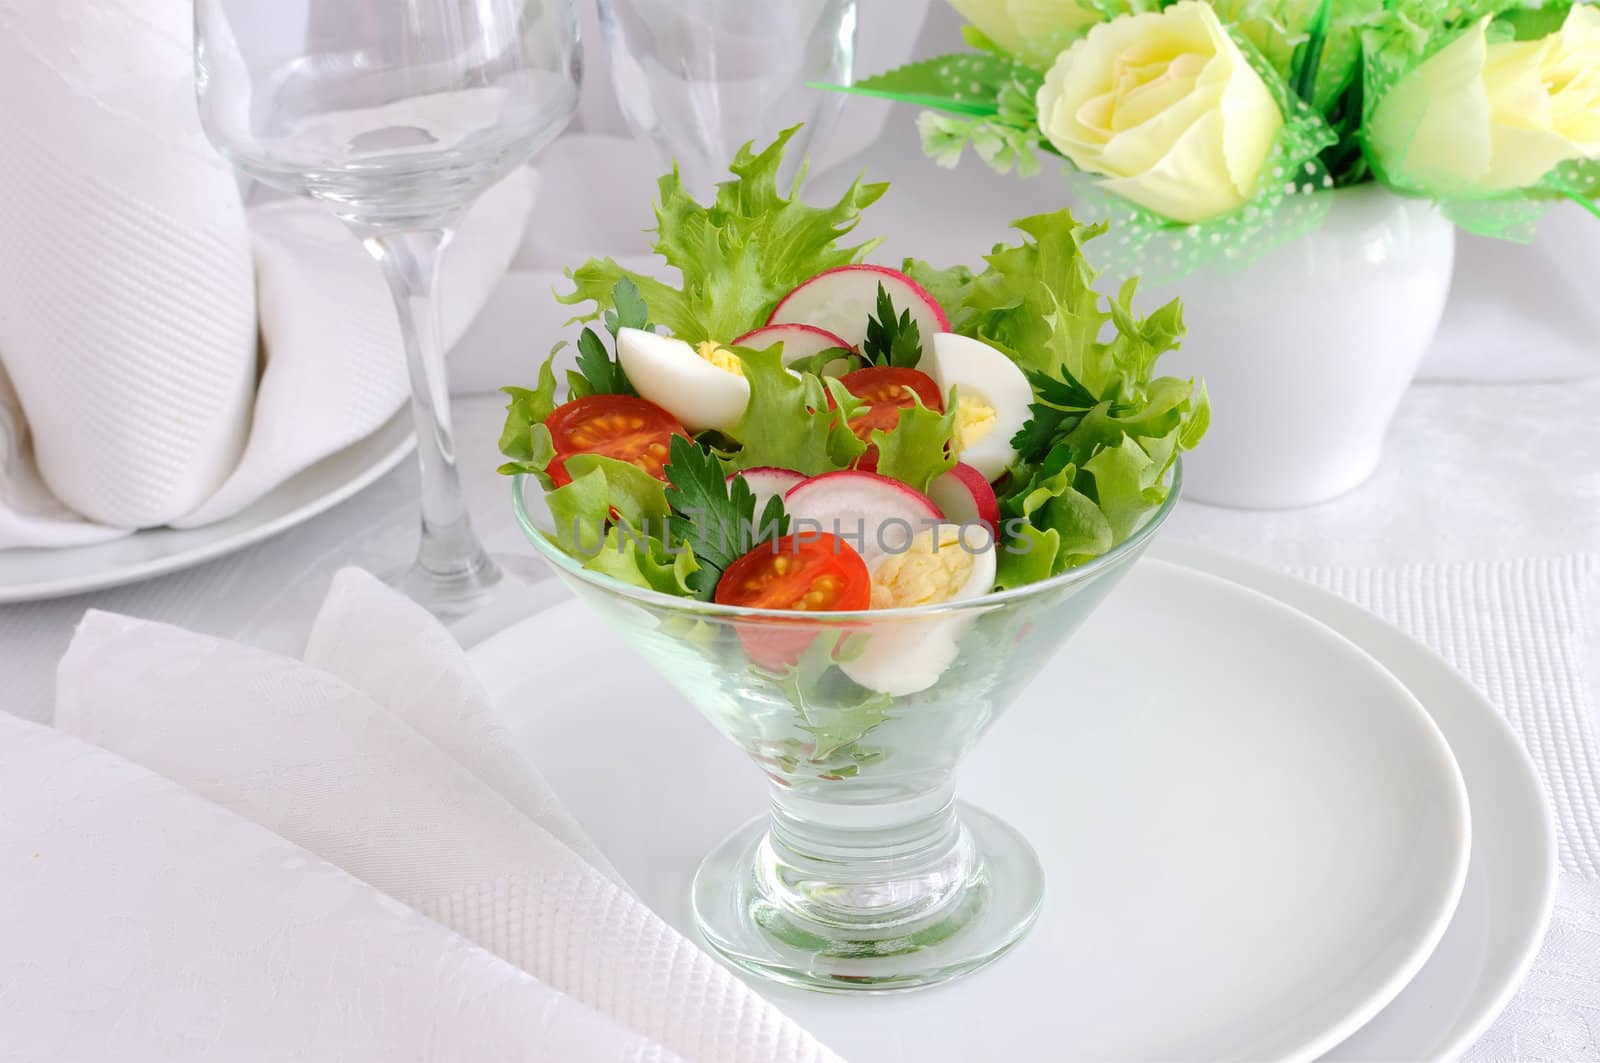 Salad of summer vegetables with quail eggs by Apolonia